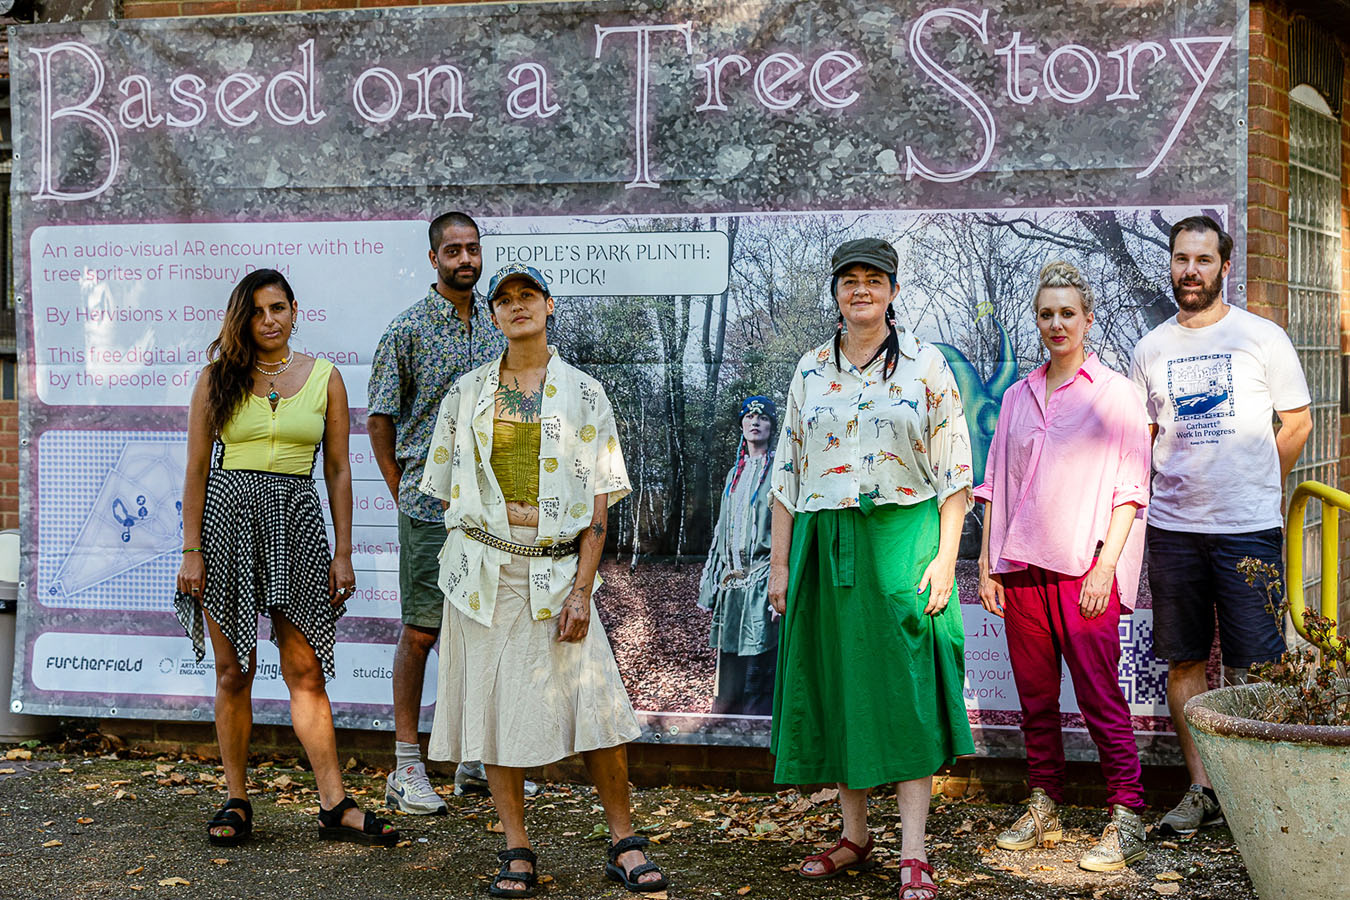 a group of six people standing in front a Based on a tree story banner on Furthfield Gallery